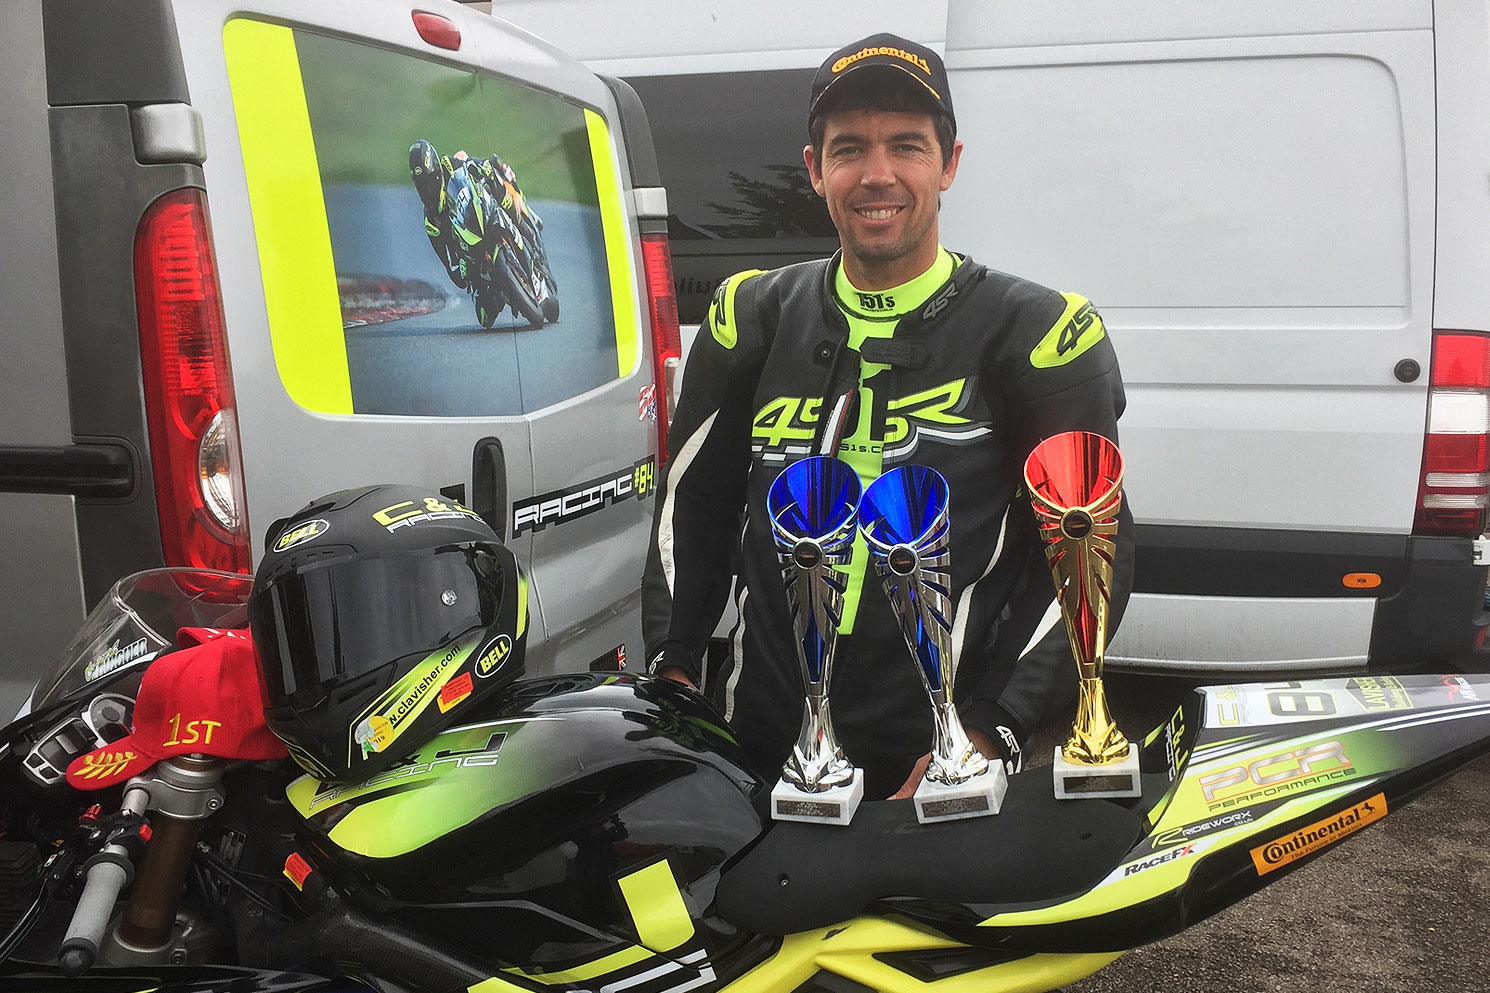 Chris Lavisher with trophies won for C and J Motorcycle Racing